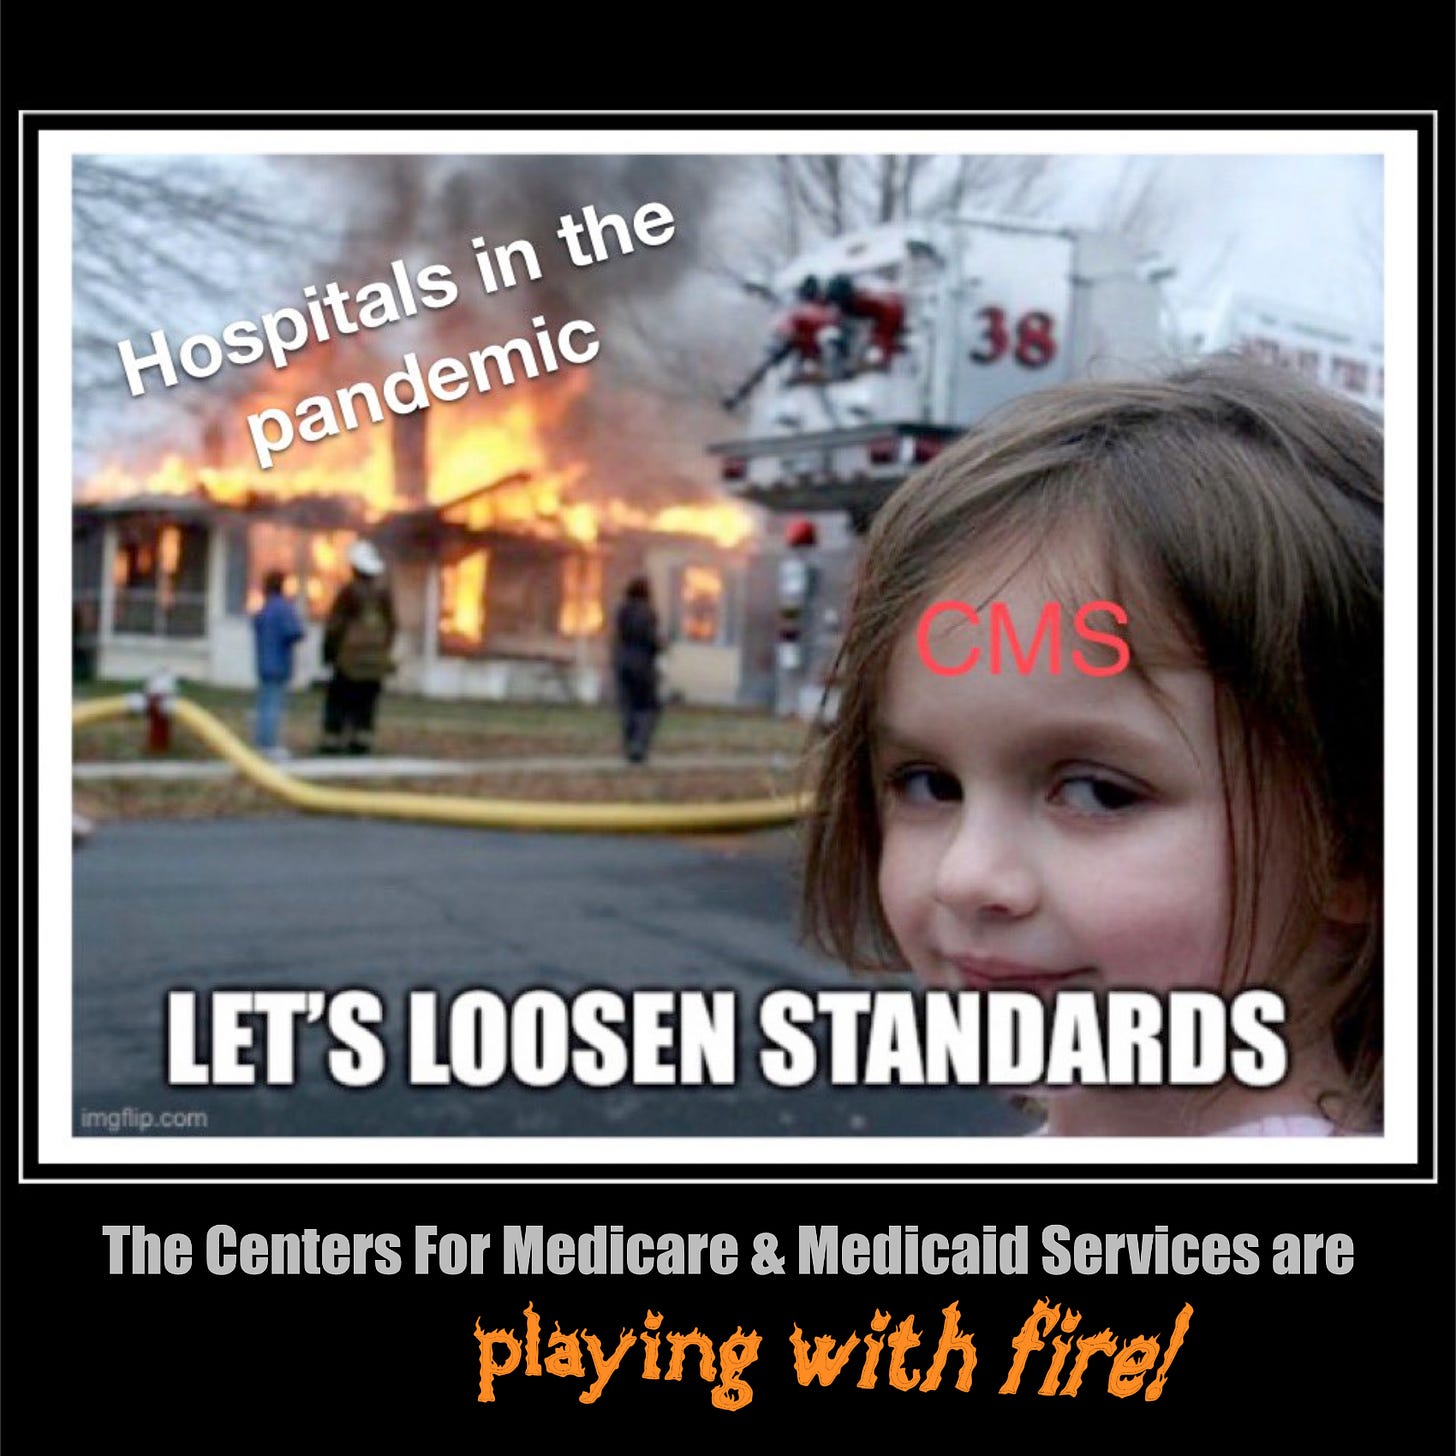 Disaster Girl Meme photo of the little girl smiling mischievously at the camera with the house burning down across the street behind her. Over the burning house are the words Hospitals in the pandemic, the girl is labeled CMS and the bottom reads Let’s Loosen Standards, and then the caption reads The Centers for Medicare & Medicaid are playing with fire exclamation point, and the words playing with fire are done in orange with a flame style font